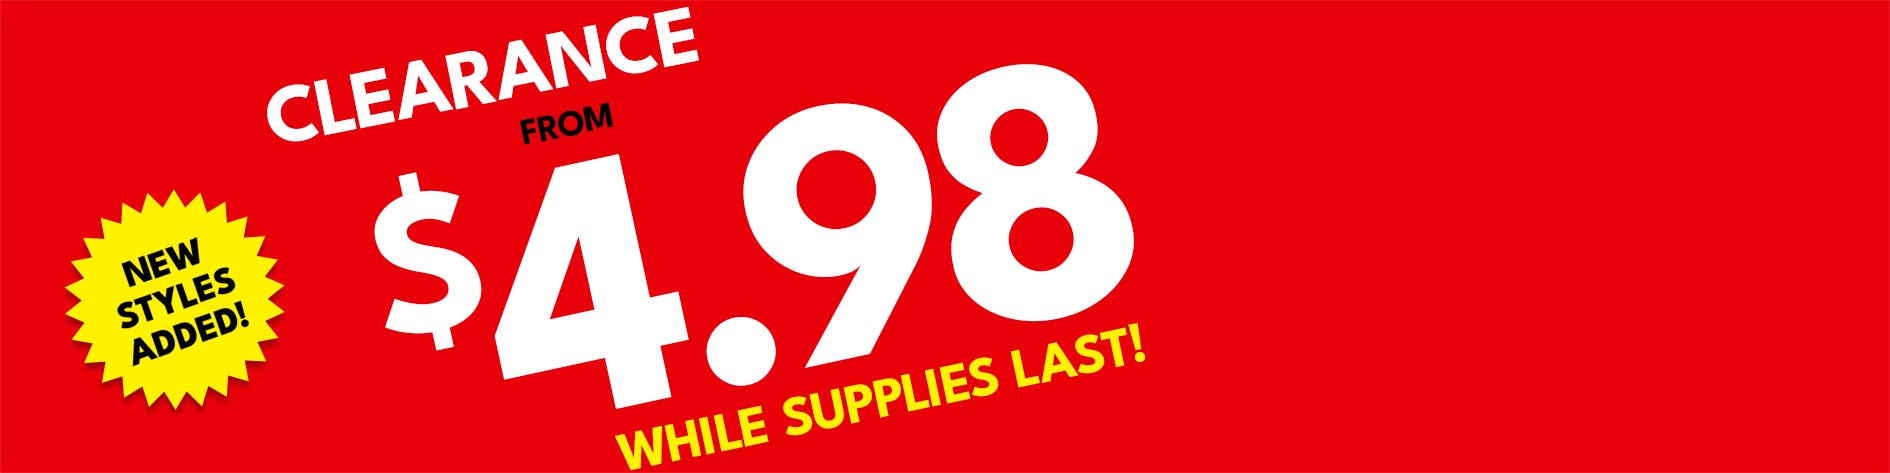 Clearance from $4.98! while supplies last! shop all clearance